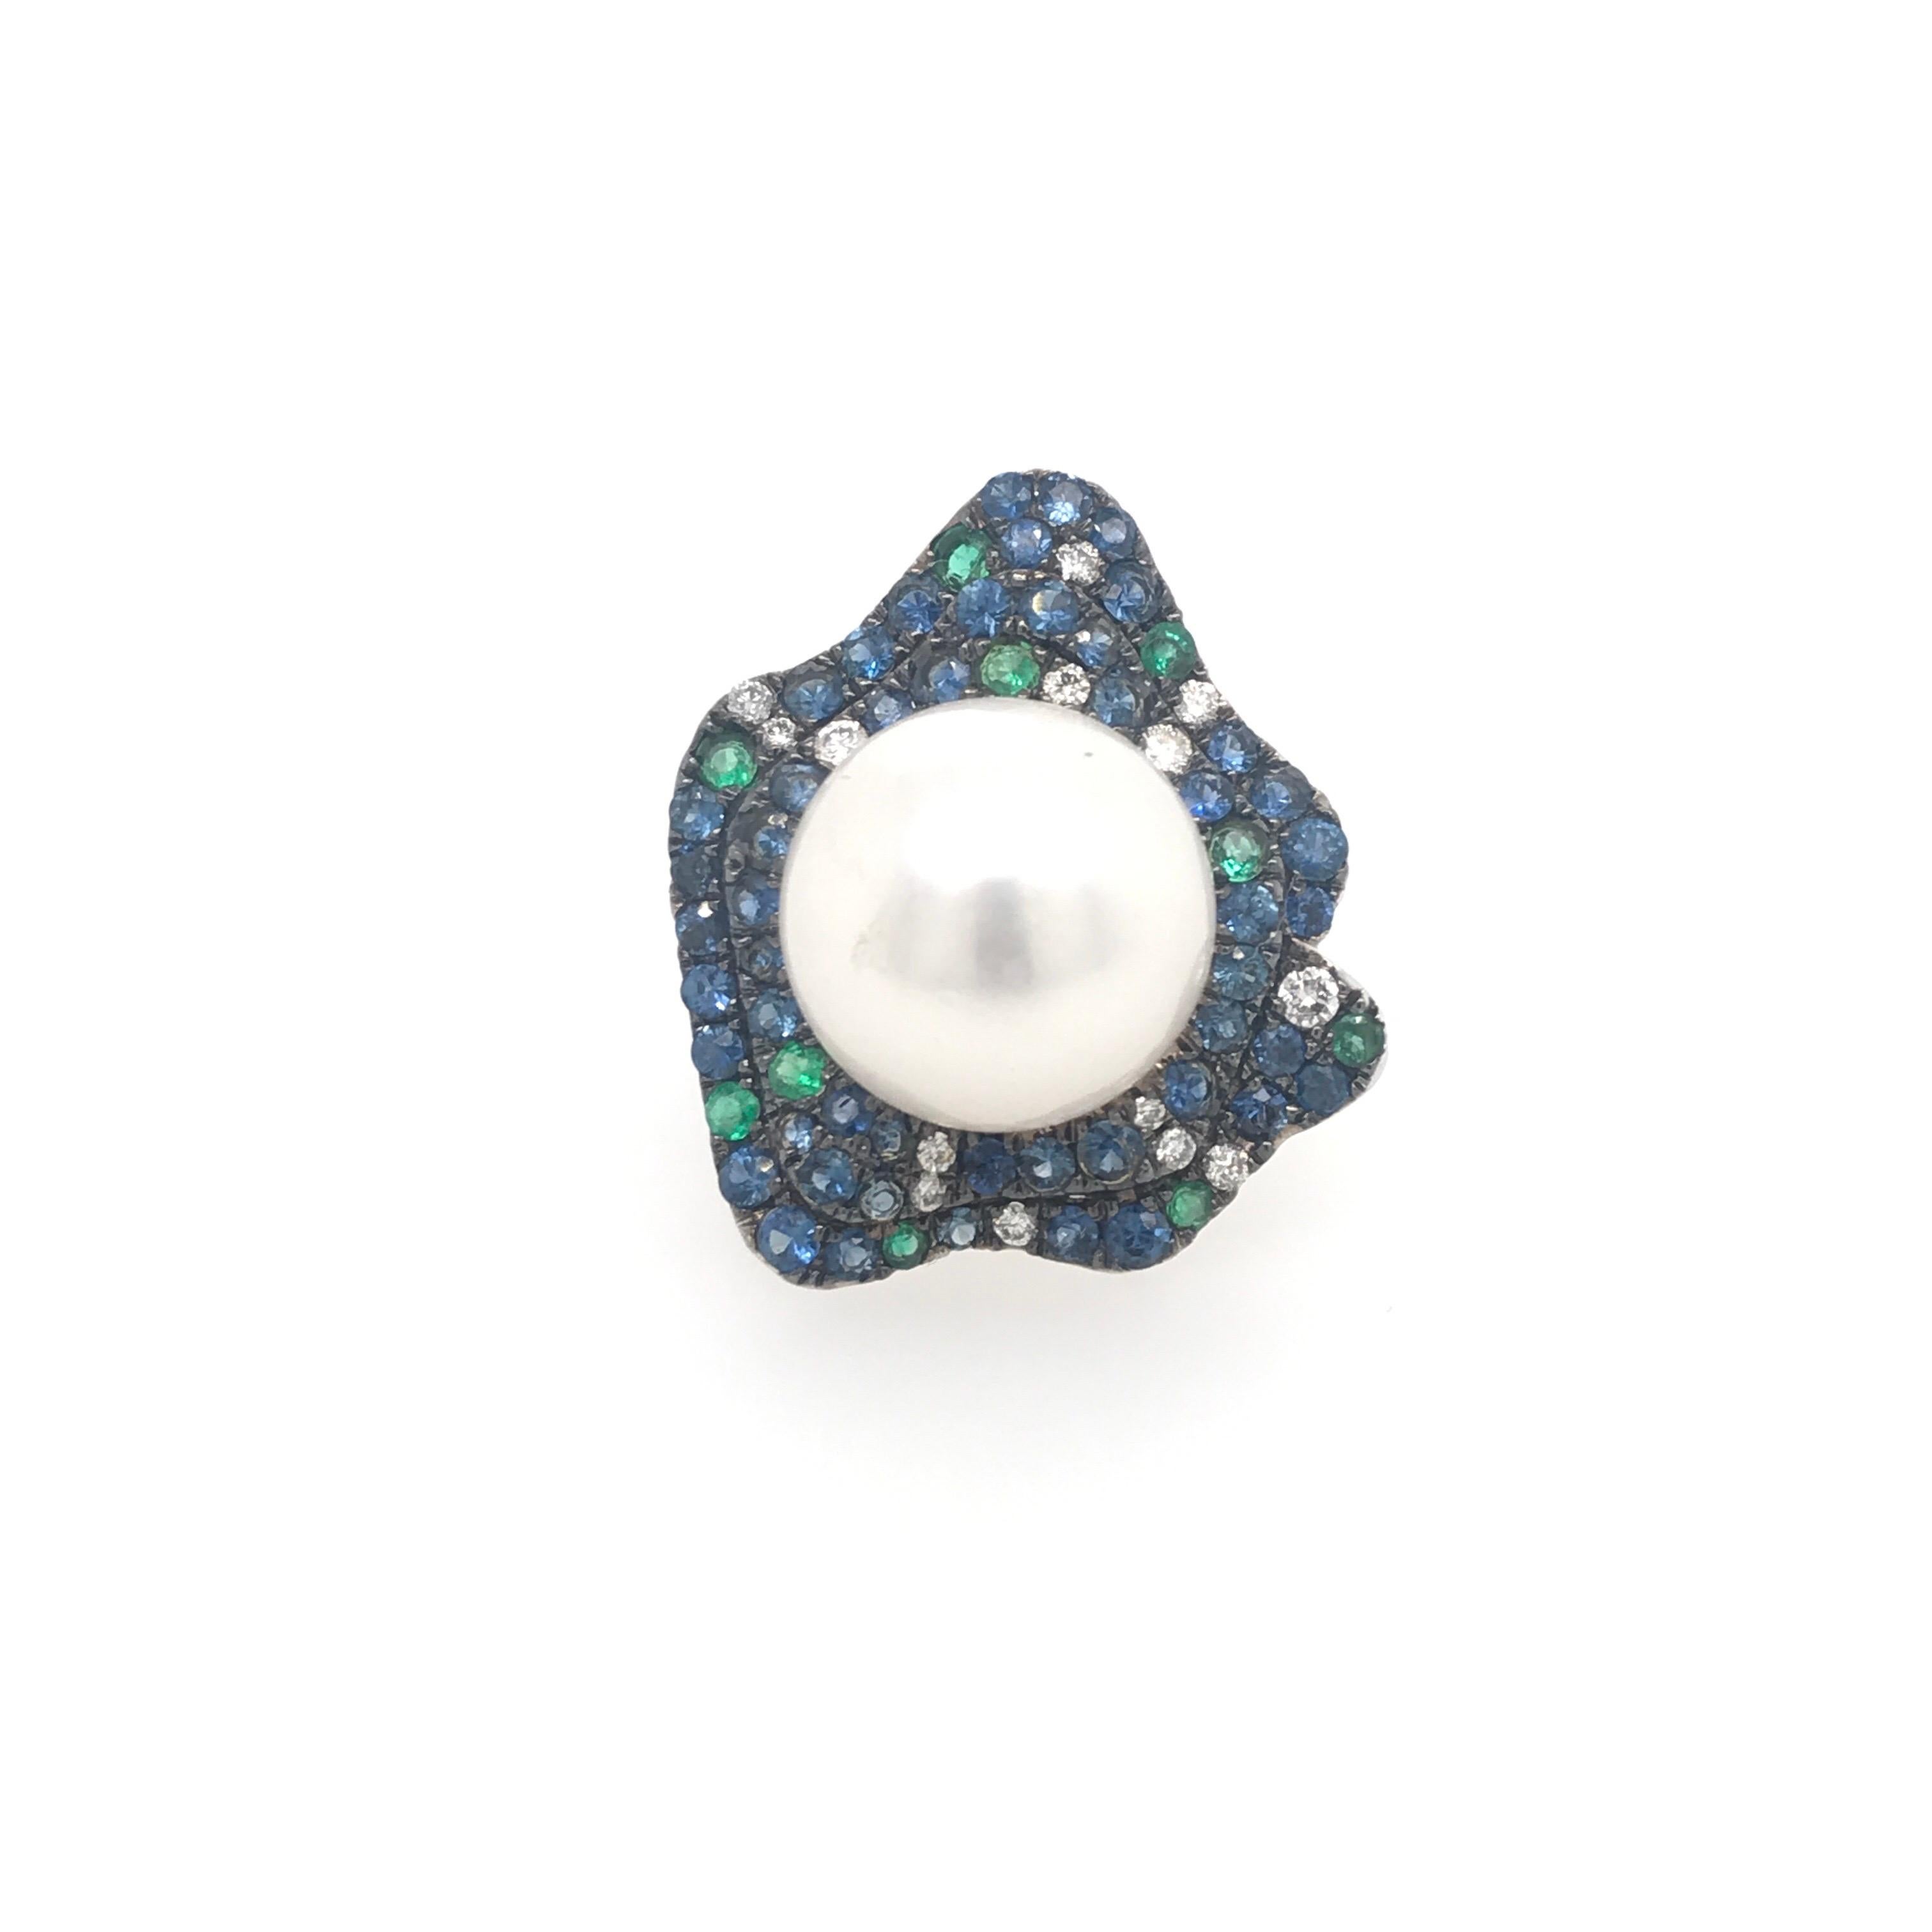 18K White Gold fashion ring featuring one South Sea Pearl measuring 13-14 mm flanked with diamonds, 0.21 carats, blue sapphires, 1.80 carats, and green emeralds 0.30 carats. 